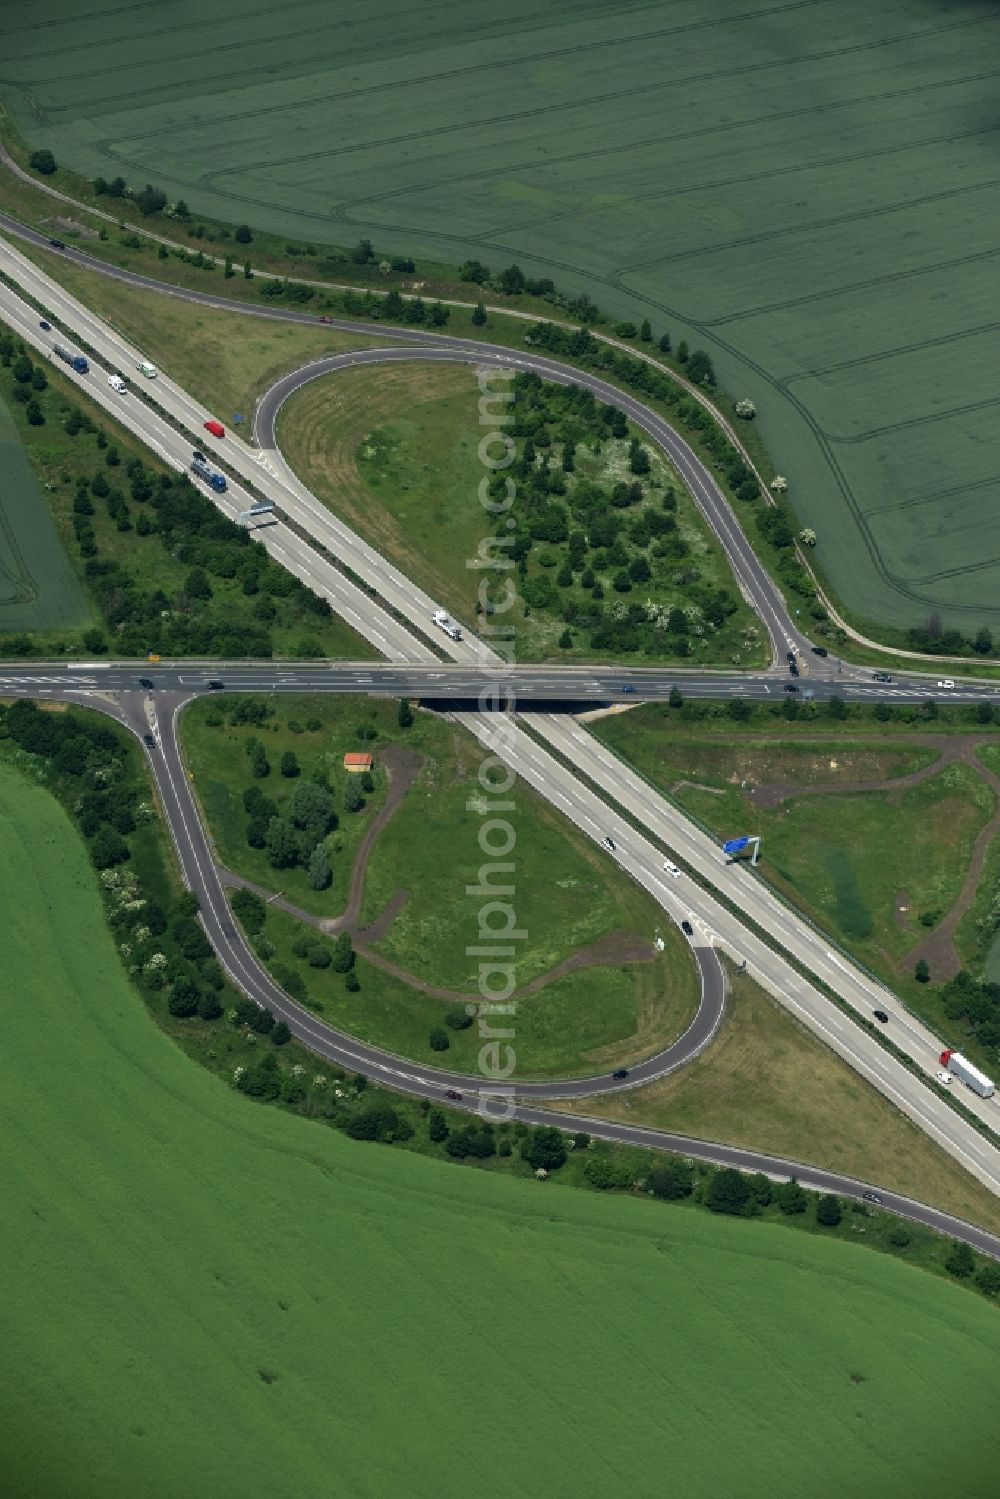 Bördeland from the bird's eye view: Traffic flow at the intersection- motorway of the B246a and the A 14 near Welsleben in Boerdeland in the state Saxony-Anhalt